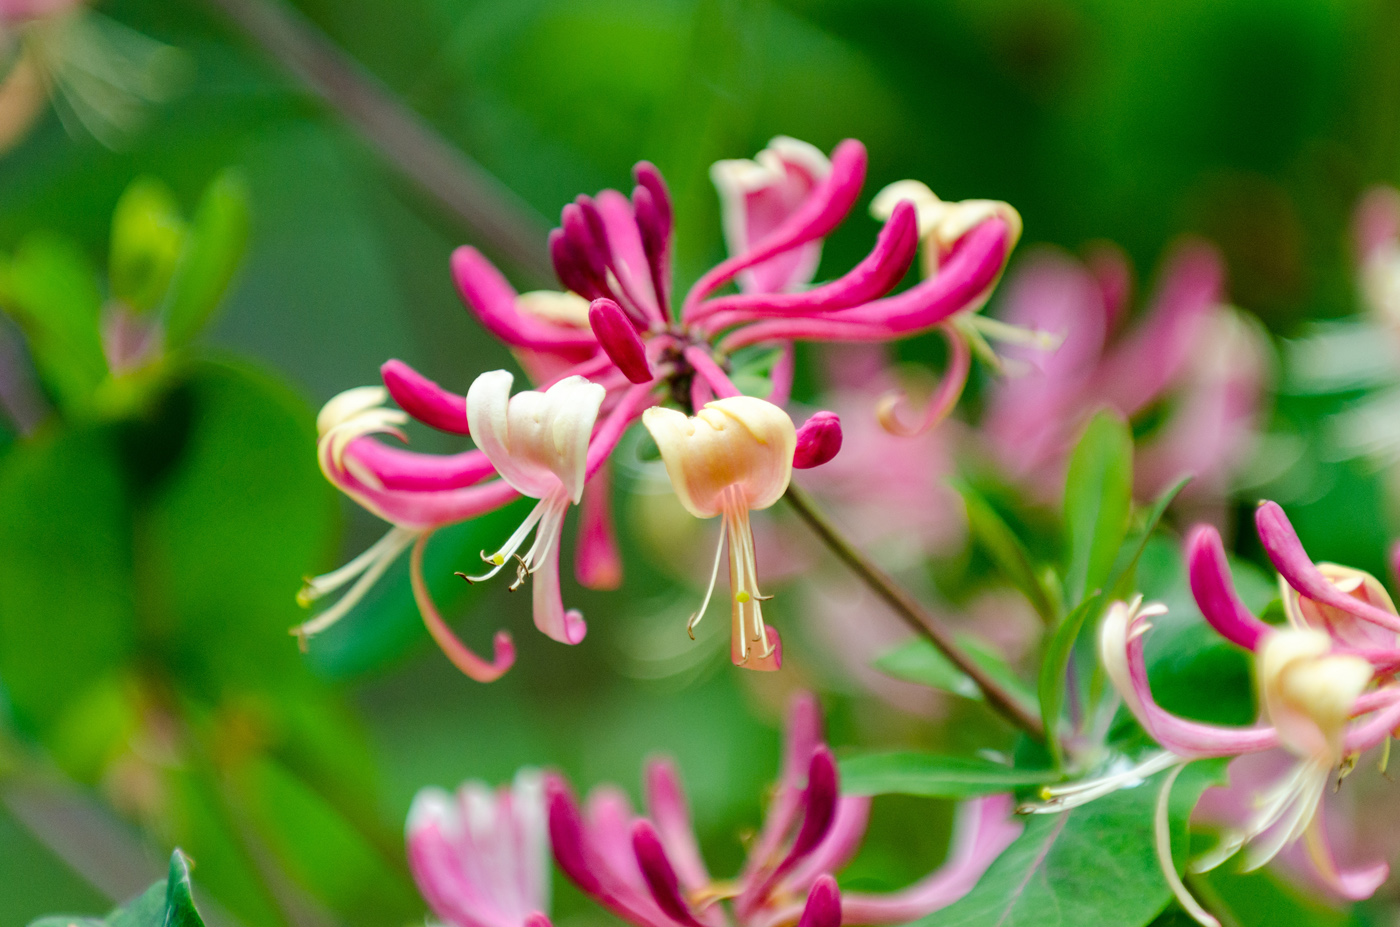 Japanese Honeysuckle: Problematic Weed or Outstanding Herbal Remedy? You Decide.